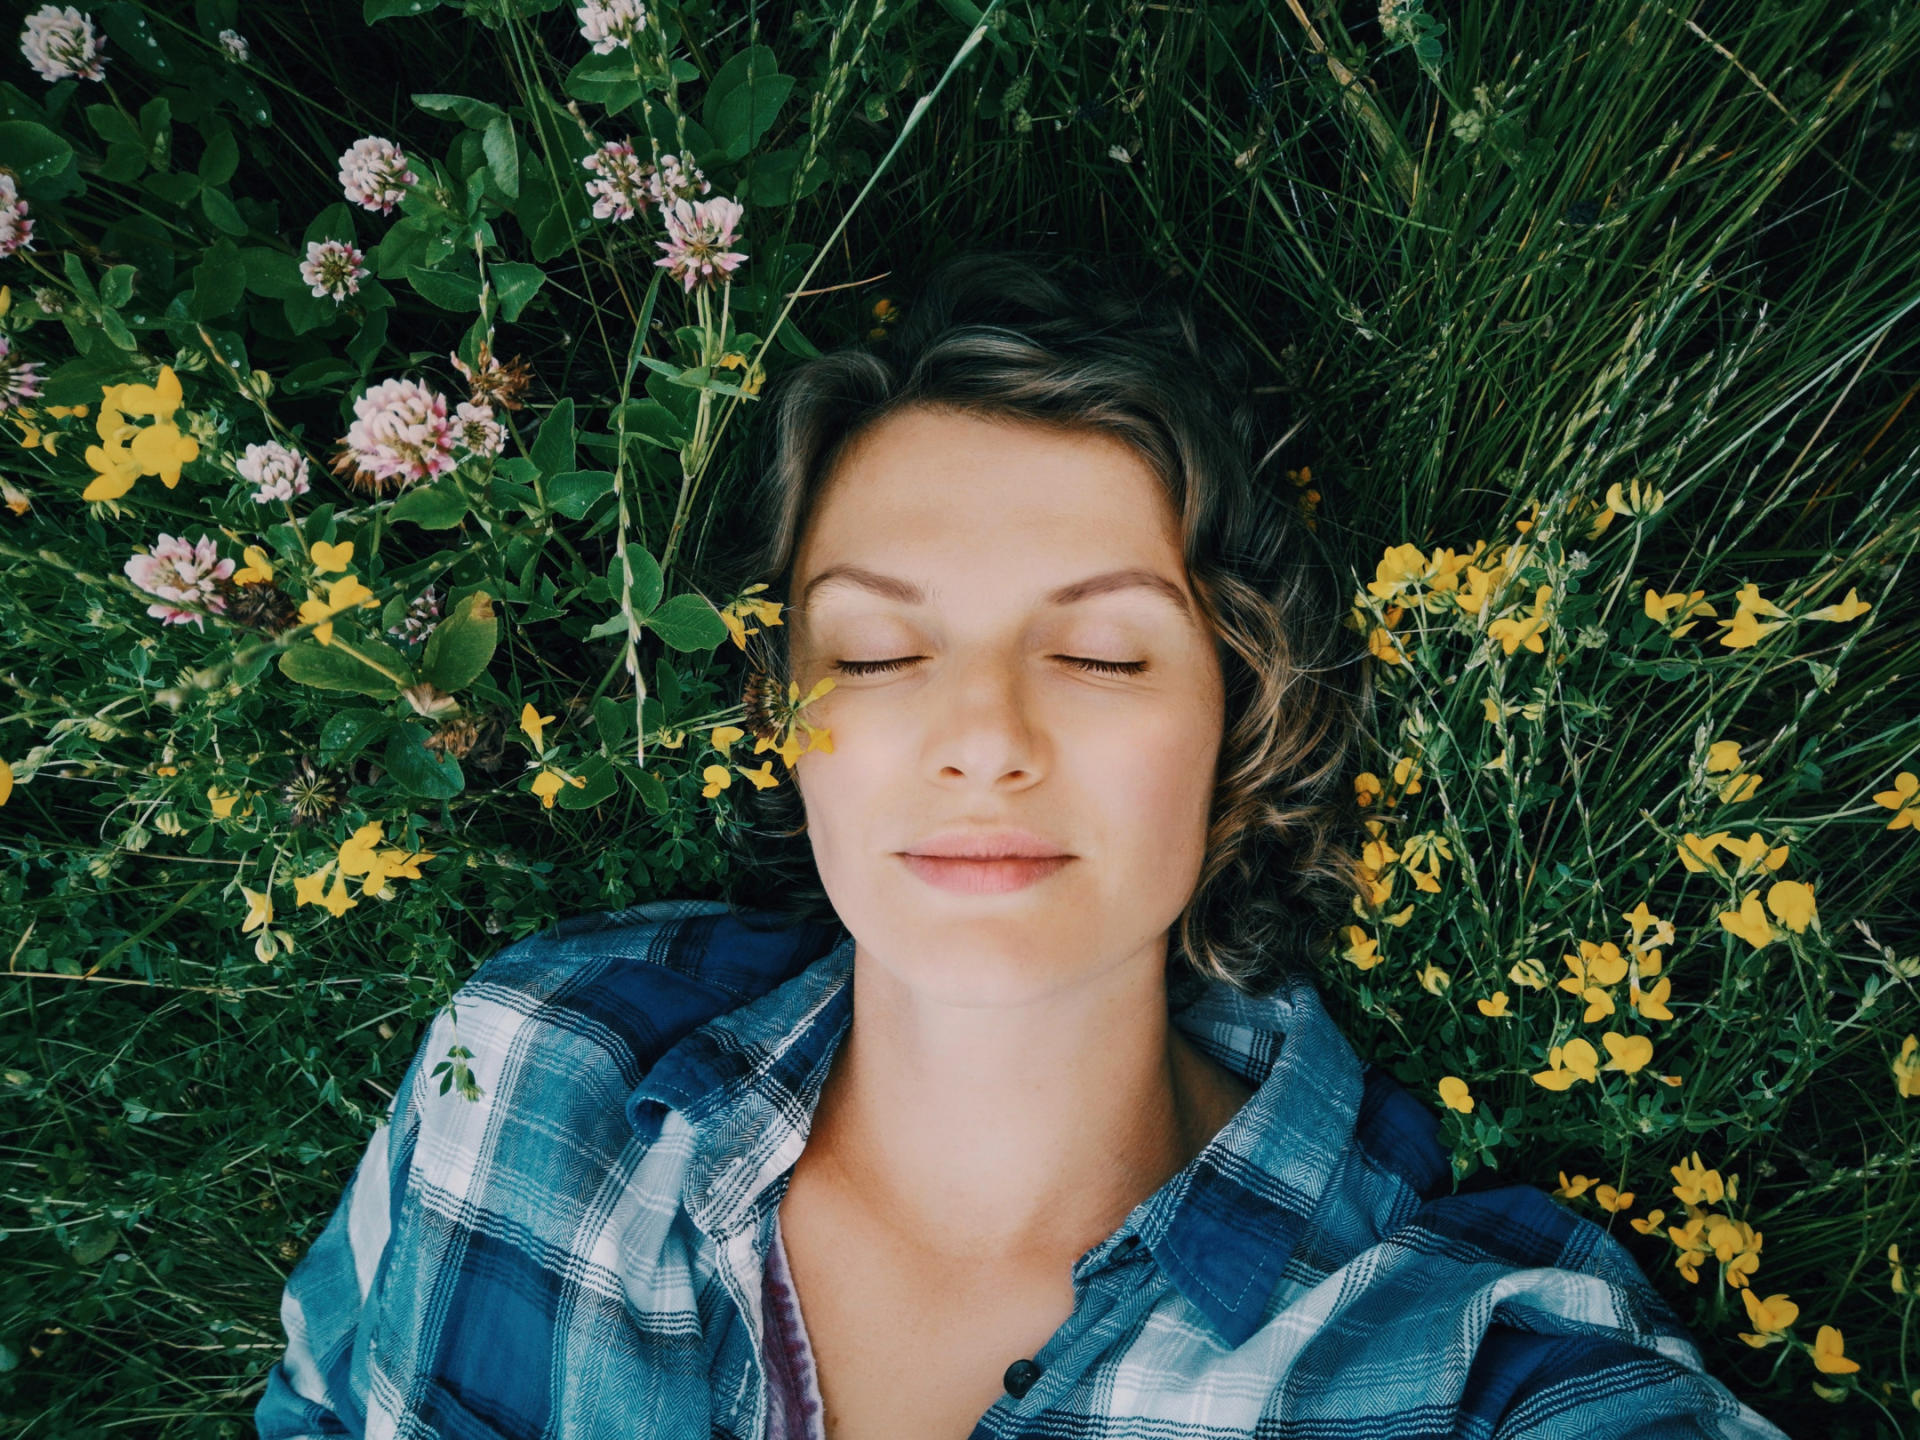 A woman lying in a field of flowers with her eyes closed